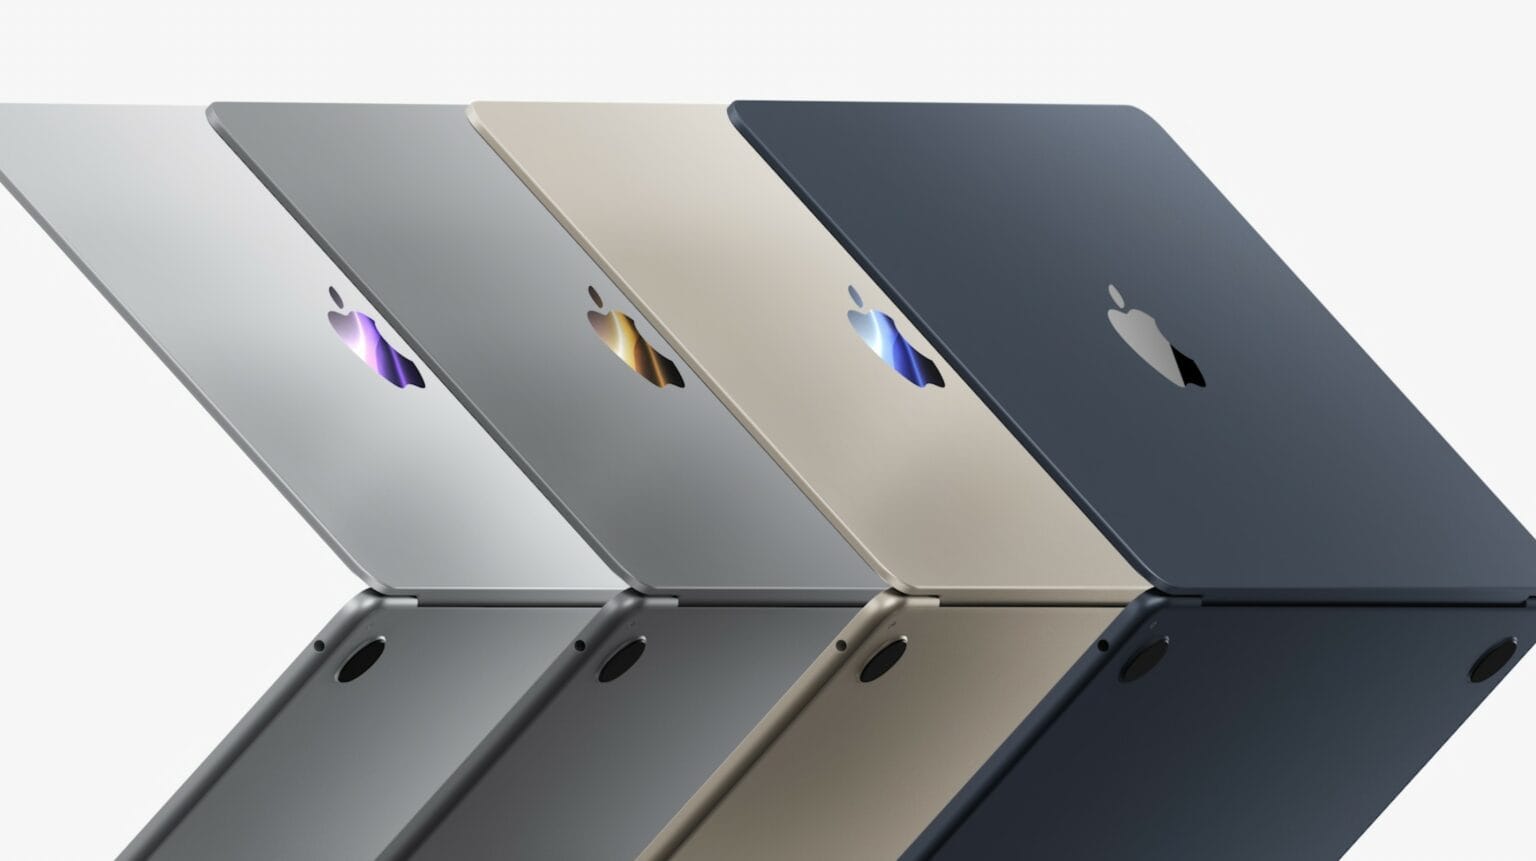 WWCC22: The new M2 MacBook Air comes in four colors.